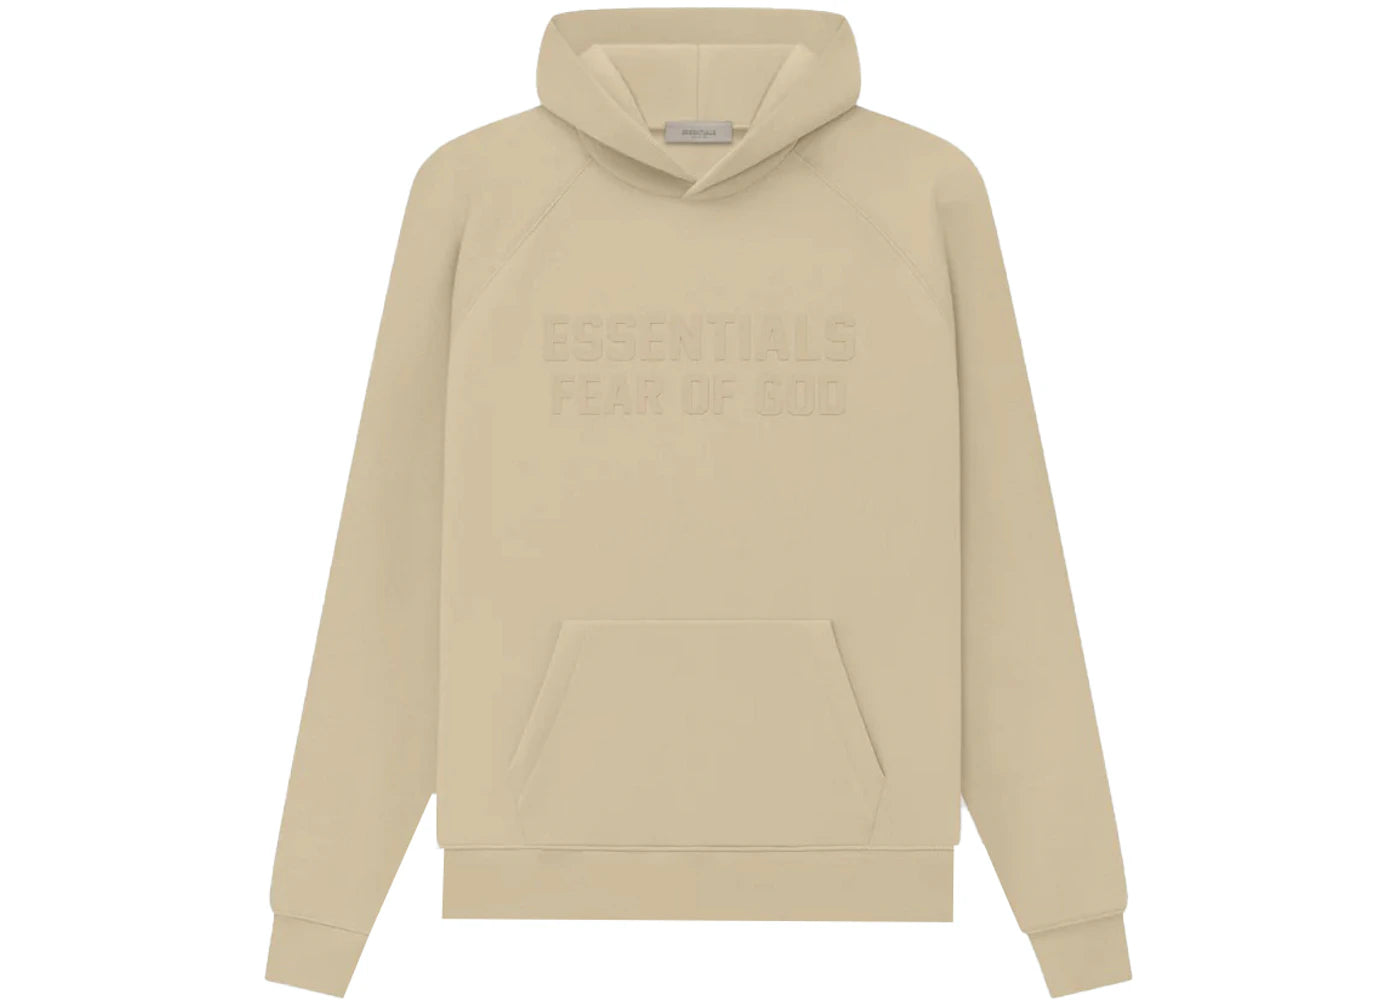 Fear of God Essentials ‘Sand’ Hoodie